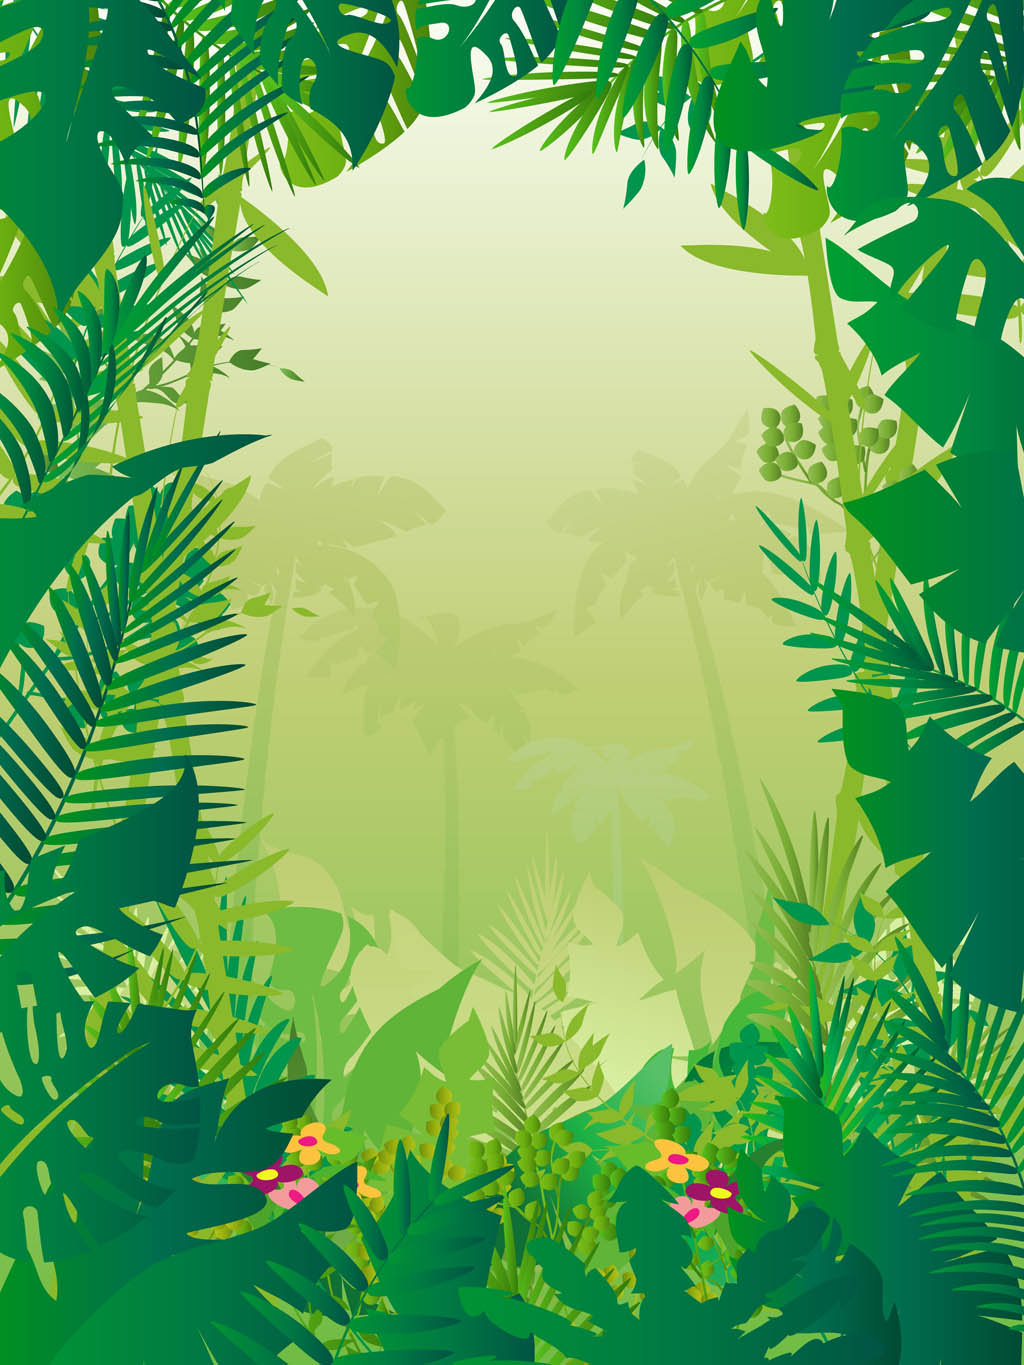 Jungle background free clipart - Clip Art Library